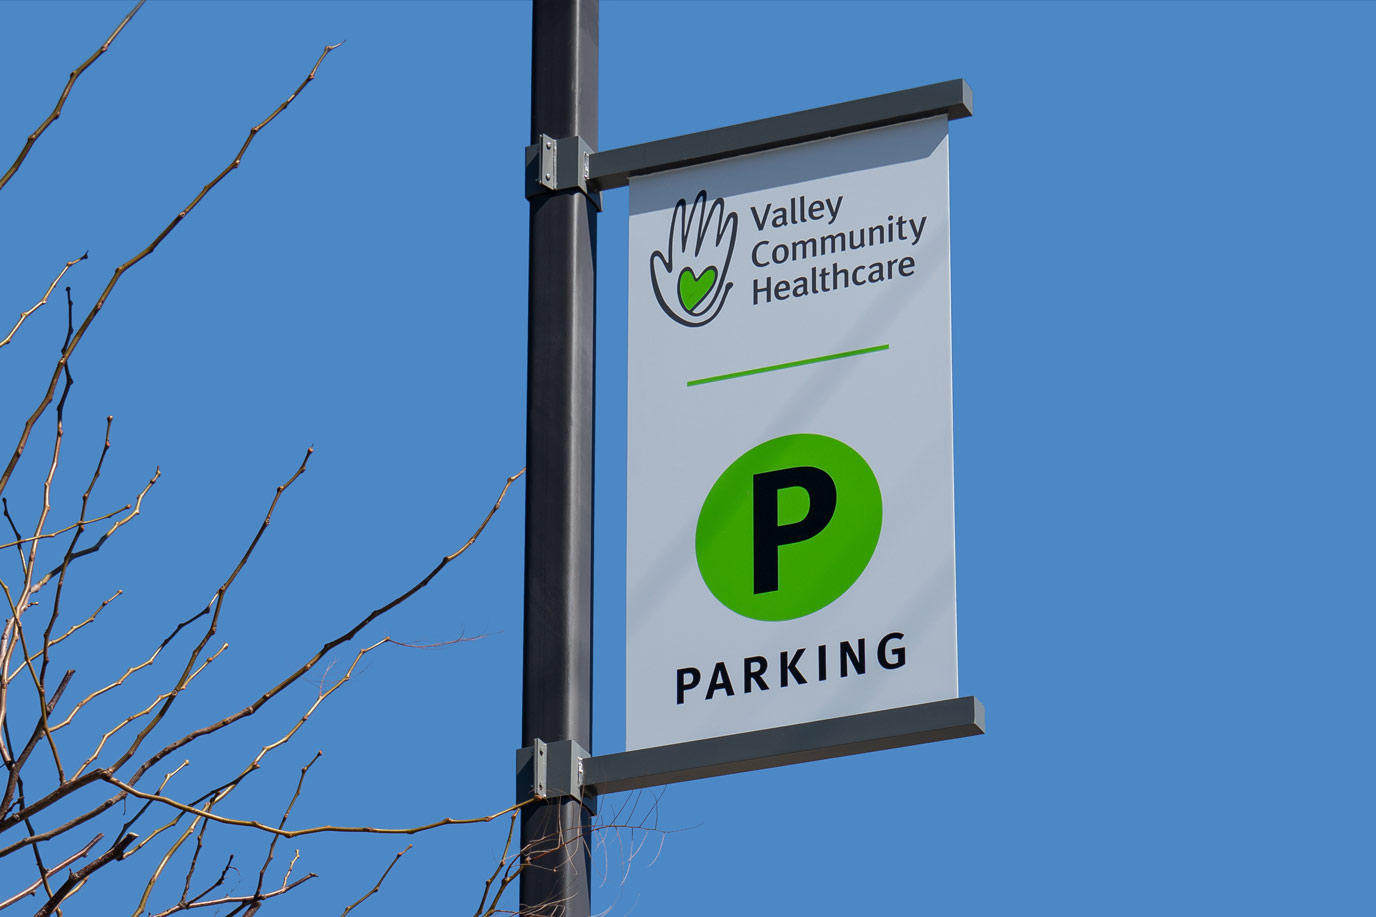 Valley Community Healthcare - Streetlamp-mounted Parking Identity